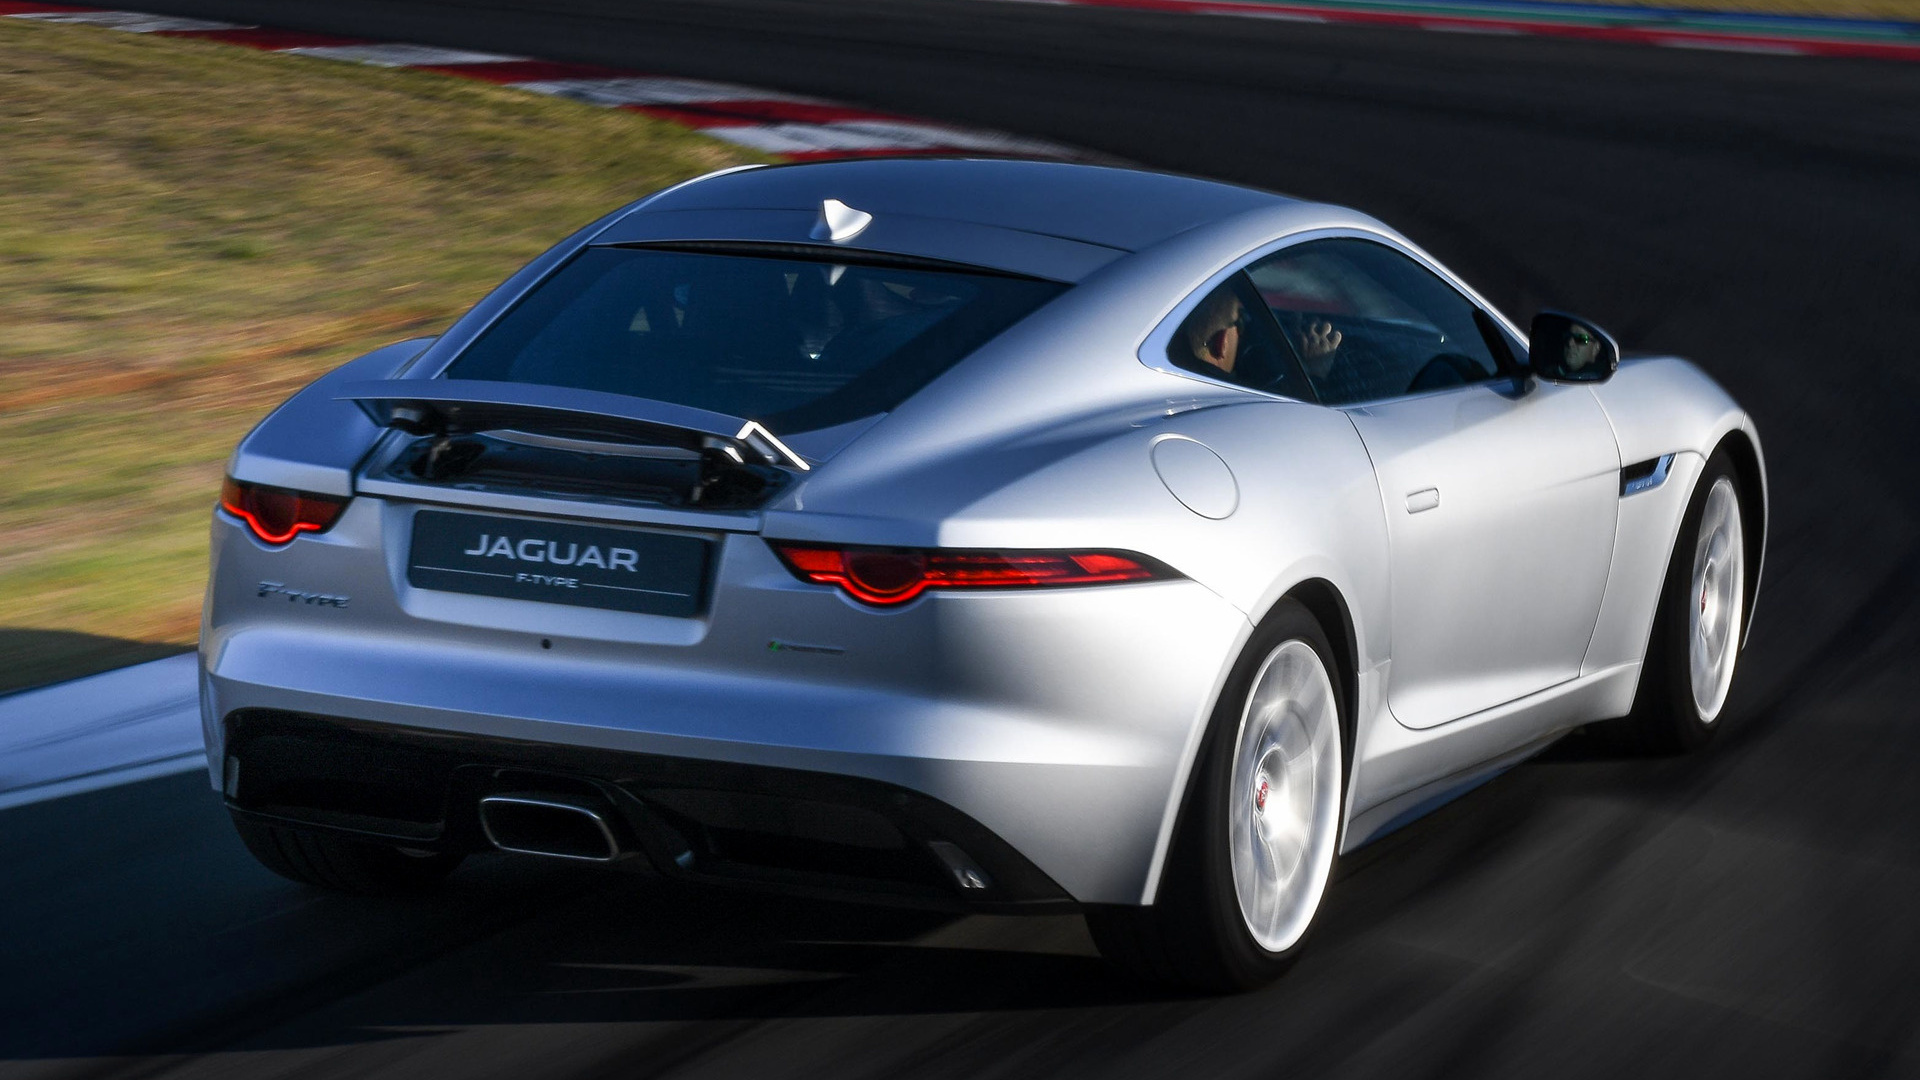 2017 Jaguar F-Type Coupe R-Dynamic (ZA) - Wallpapers and ...